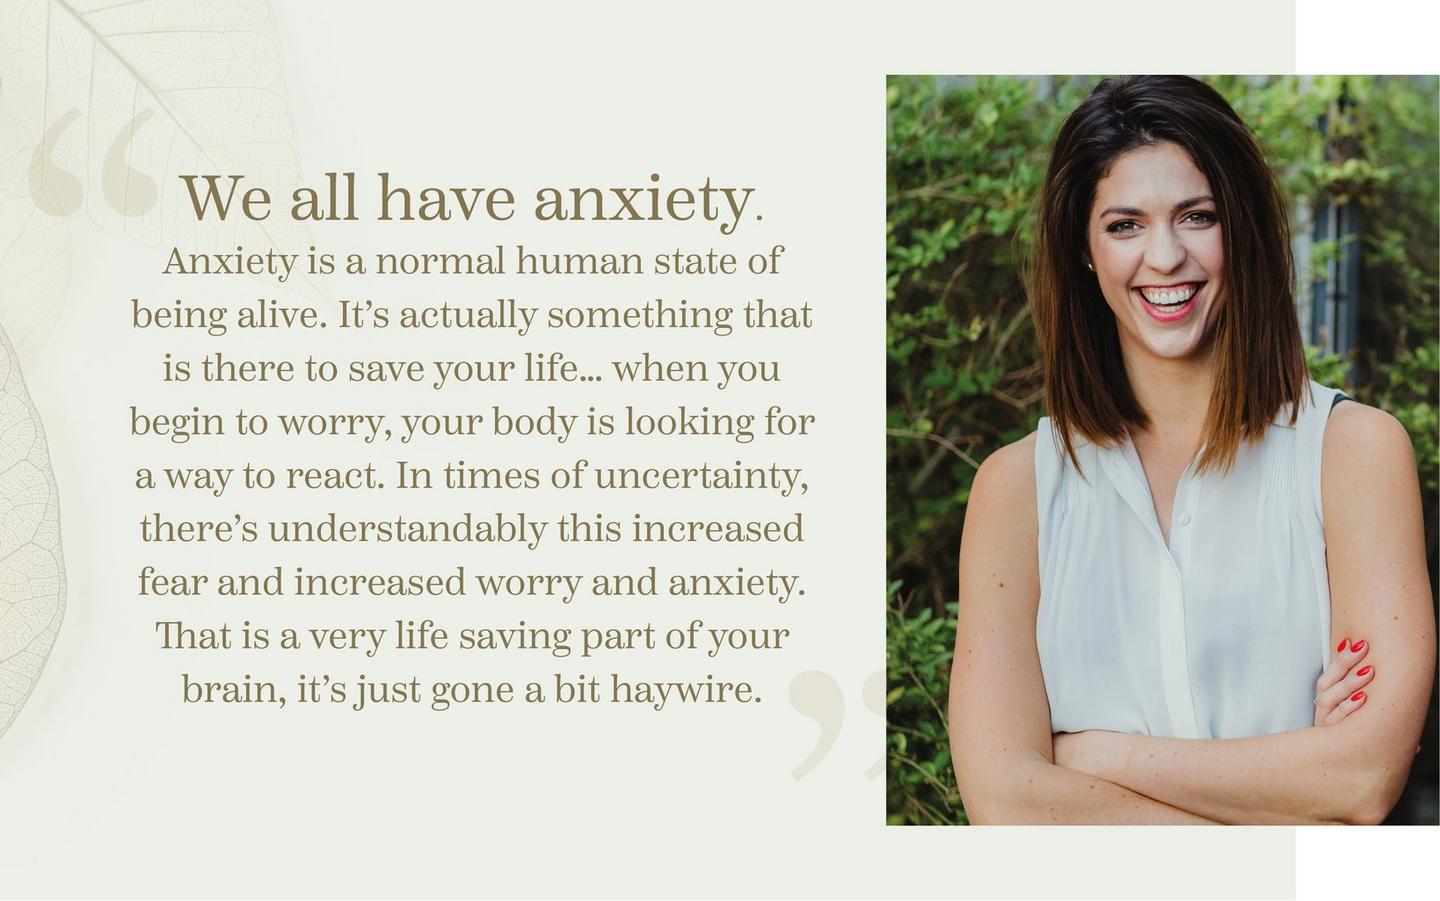 “We all have anxiety. Anxiety is a normal human state of being alive. It’s actually something that is there to save your life… when you begin to worry, your body is looking for a way to react.
            In times of uncertainty, there’s understandably this increased fear and increased worry and anxiety. That is a very life saving part of your brain, it’s just gone a bit haywire.”